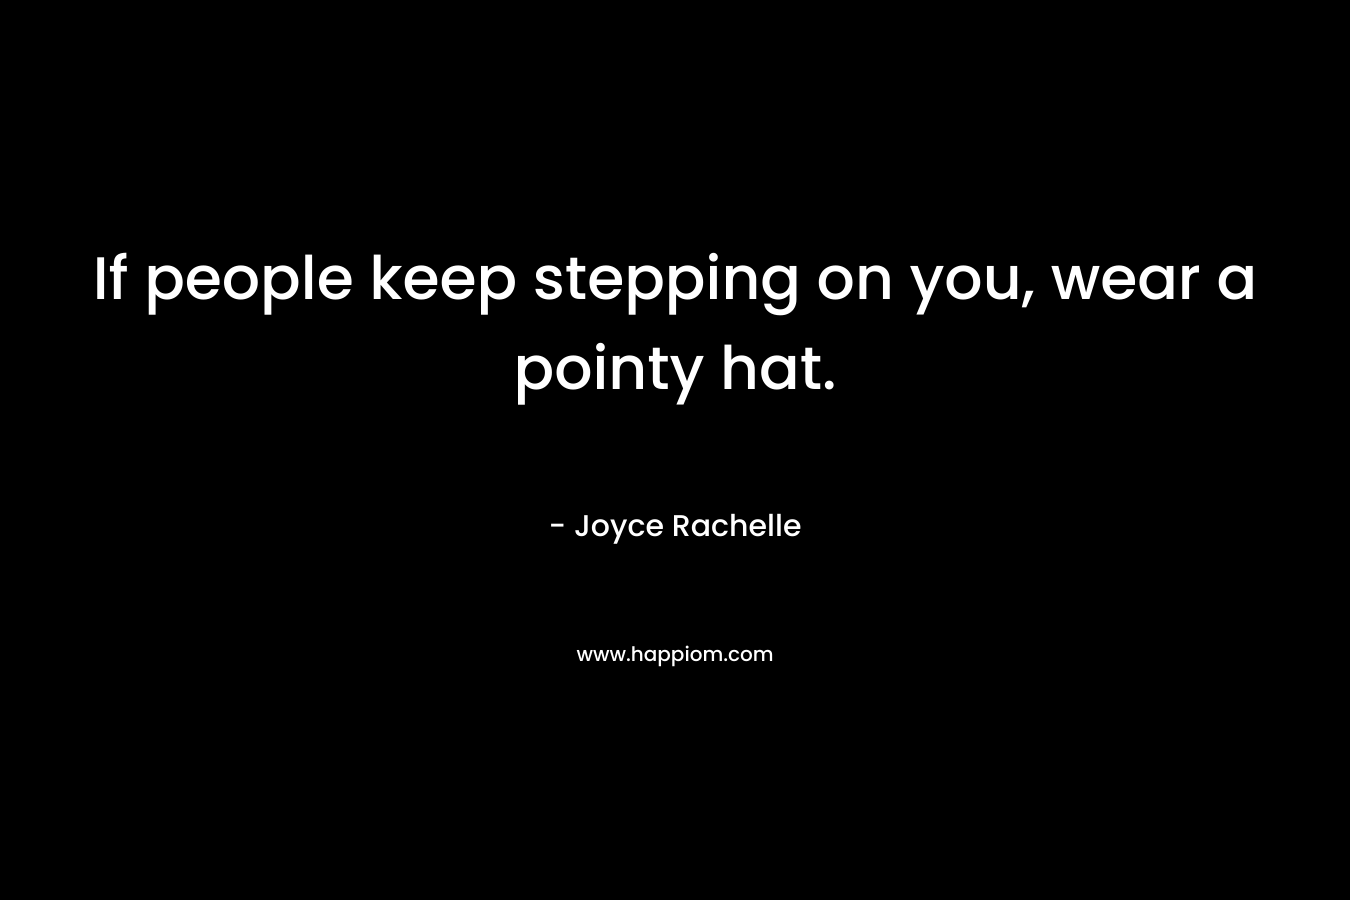 If people keep stepping on you, wear a pointy hat. – Joyce Rachelle